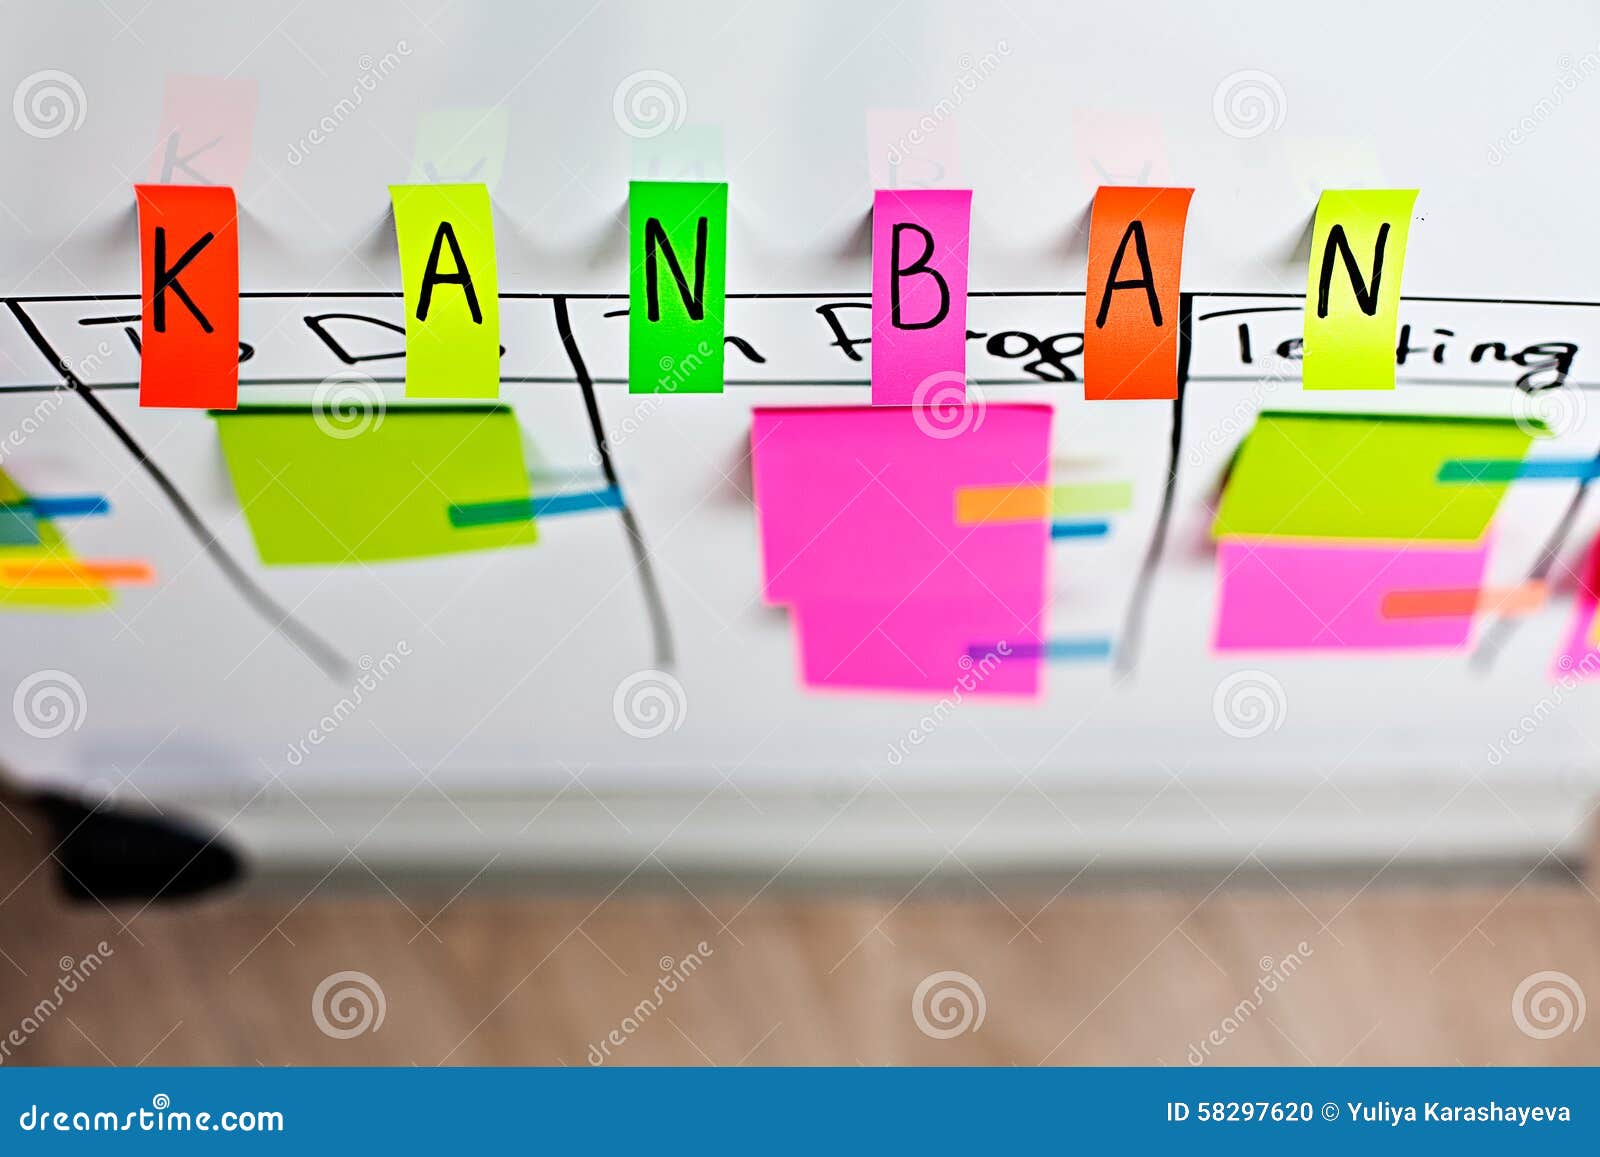 image of inscription kanban tool colored stickers on a white board.